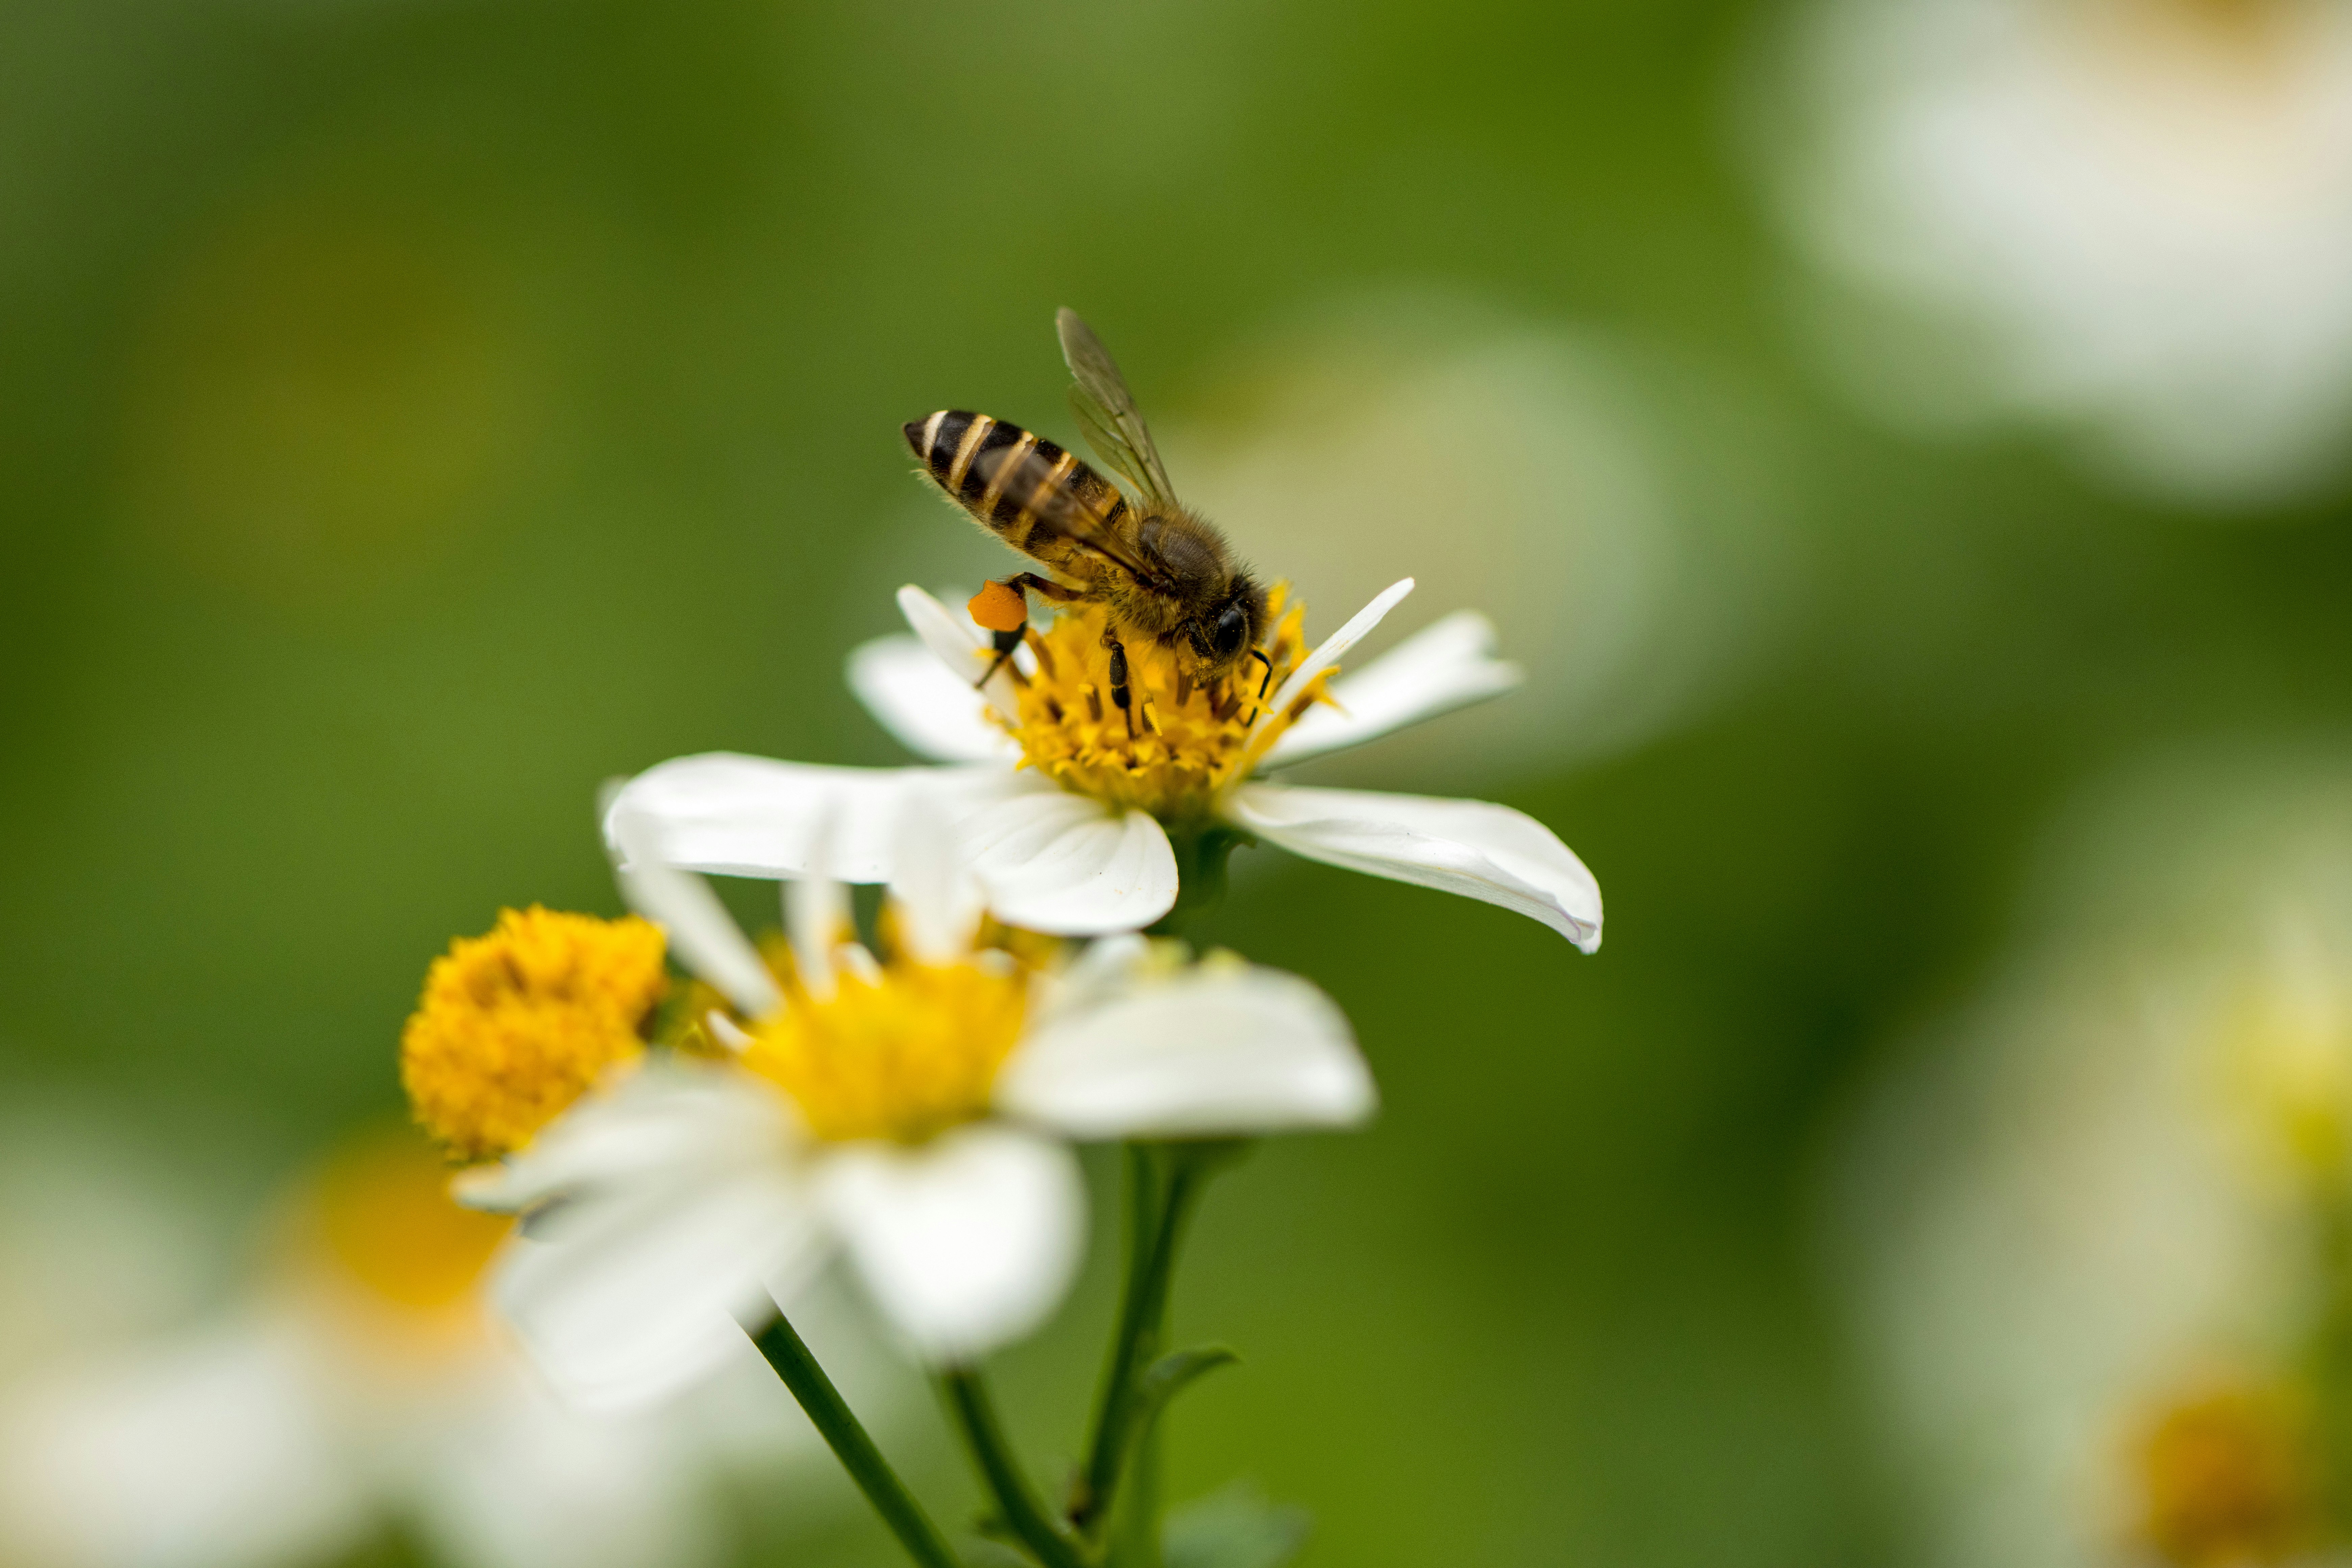 honeybee perched on white daisy in close up photography during daytime